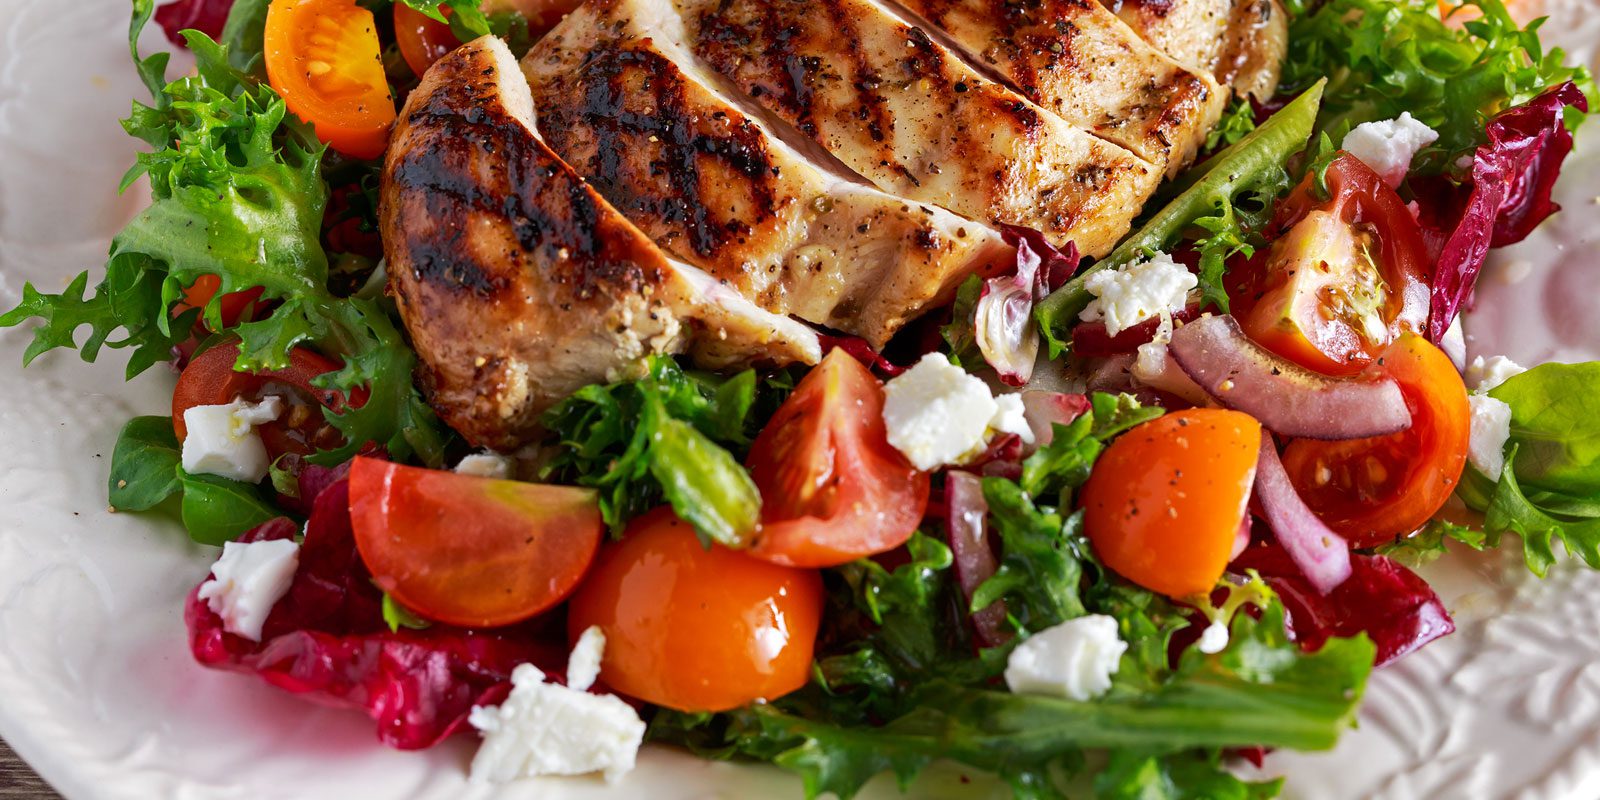 Grilled Chicken With Salad and Tzatziki Dressing